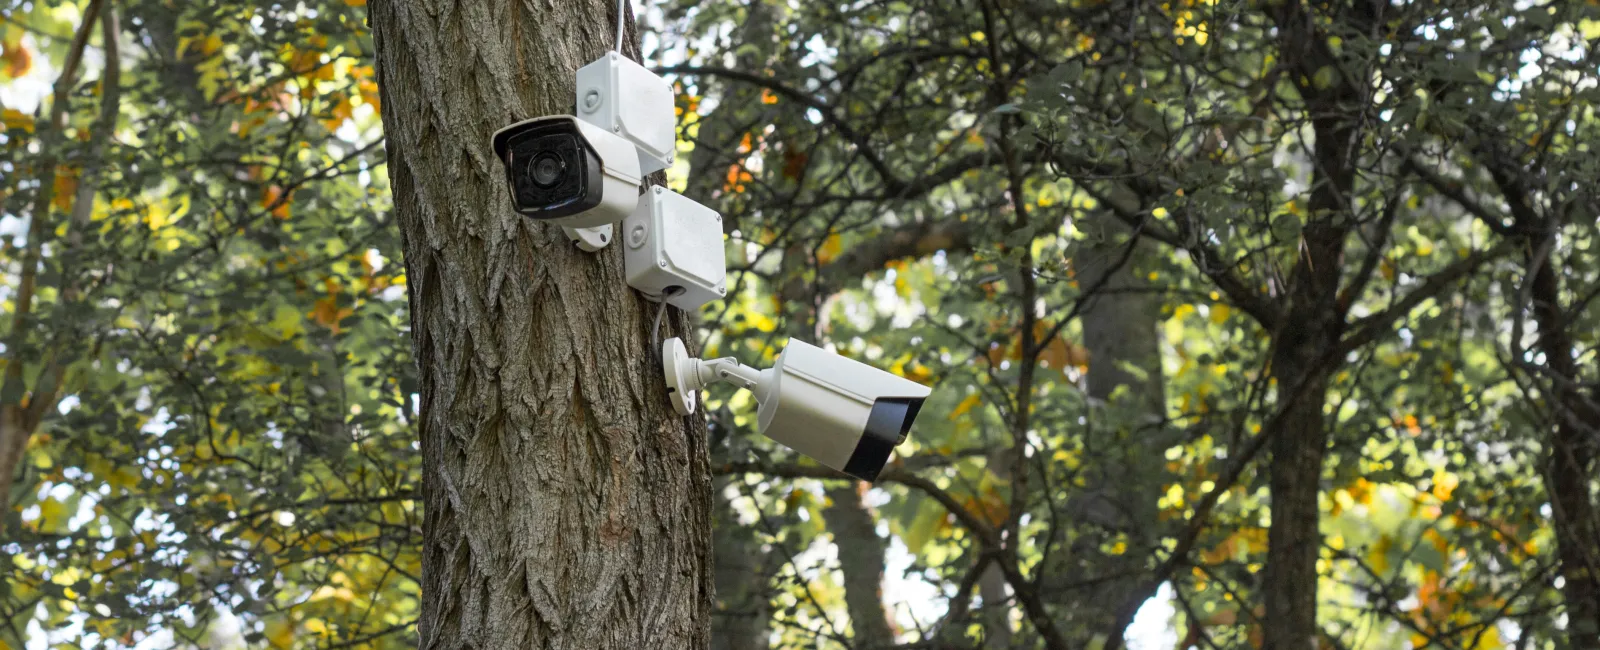 How Many Cameras Should You Have For Home Security?